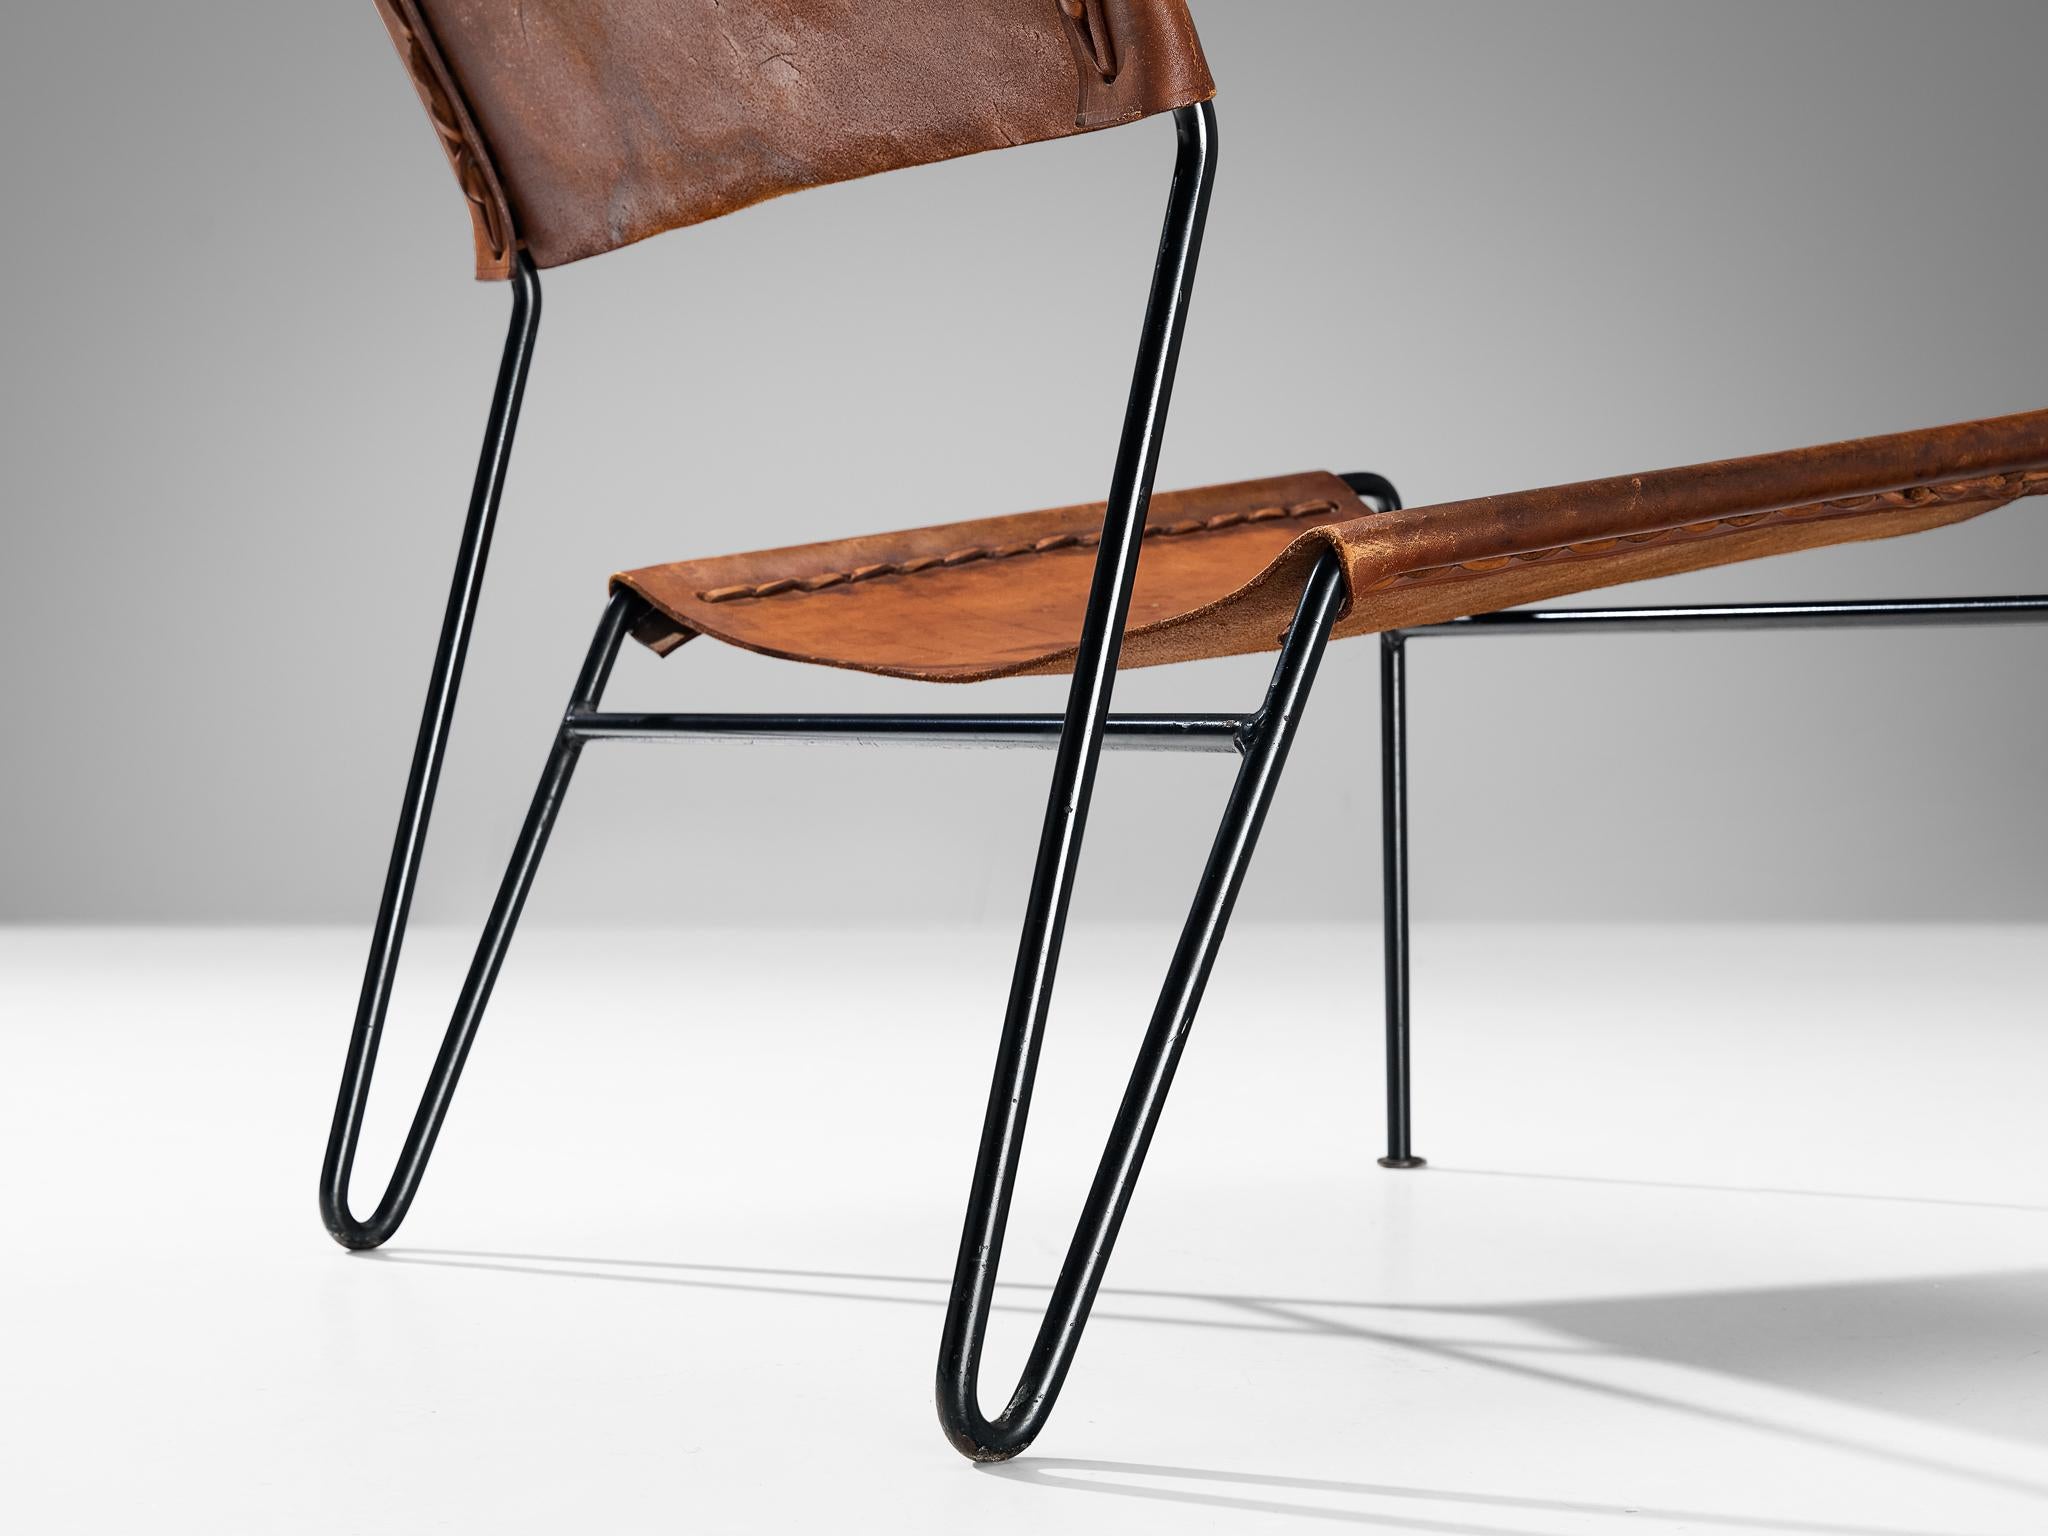 A. Dolleman for Metz & Co Modernist Easy Chair in Cognac Leather